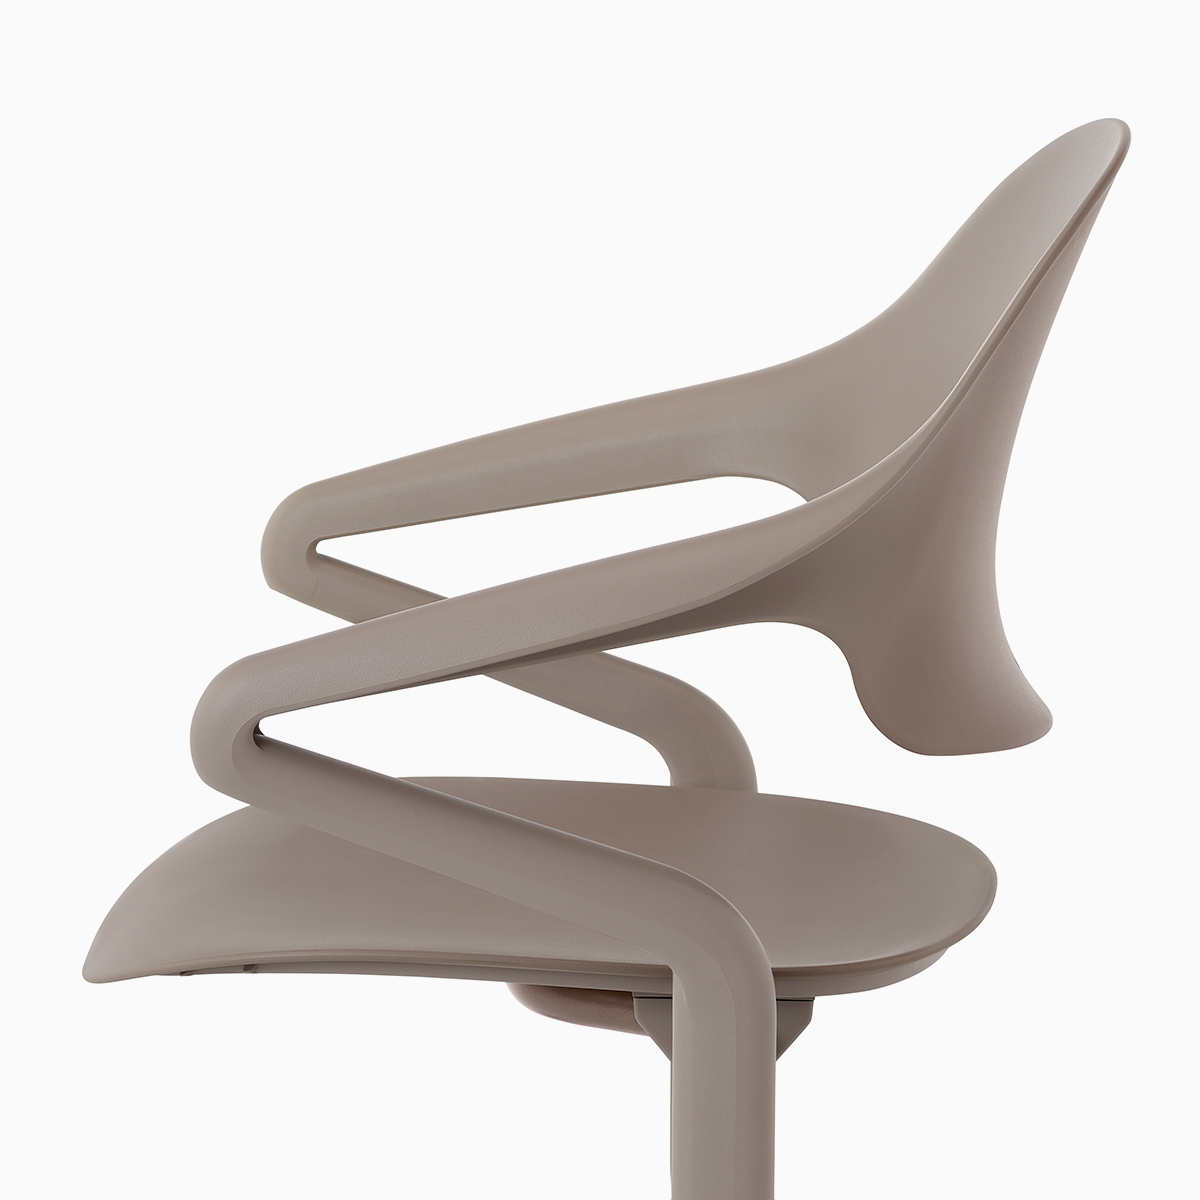 Profile view of a Fuld Nesting Chair in Cocoa.